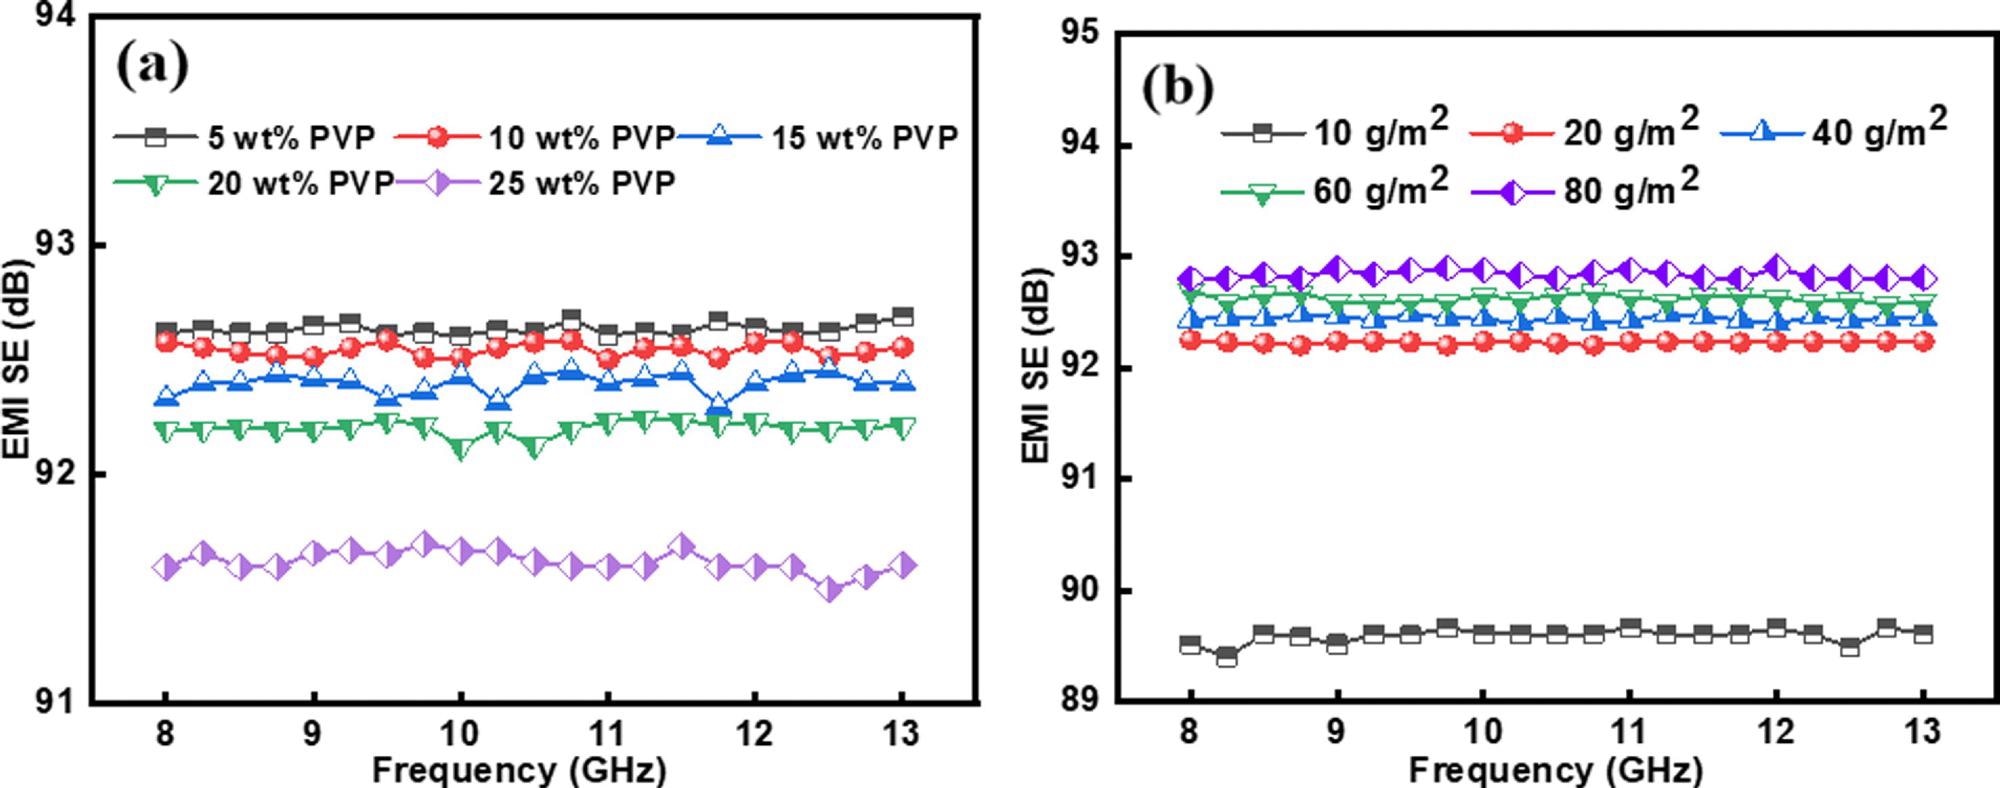 (a) Effect of PVP content on the EMI SE of the CAFP. (b) Effect of coating amount on the EMI SE of the CAFP.